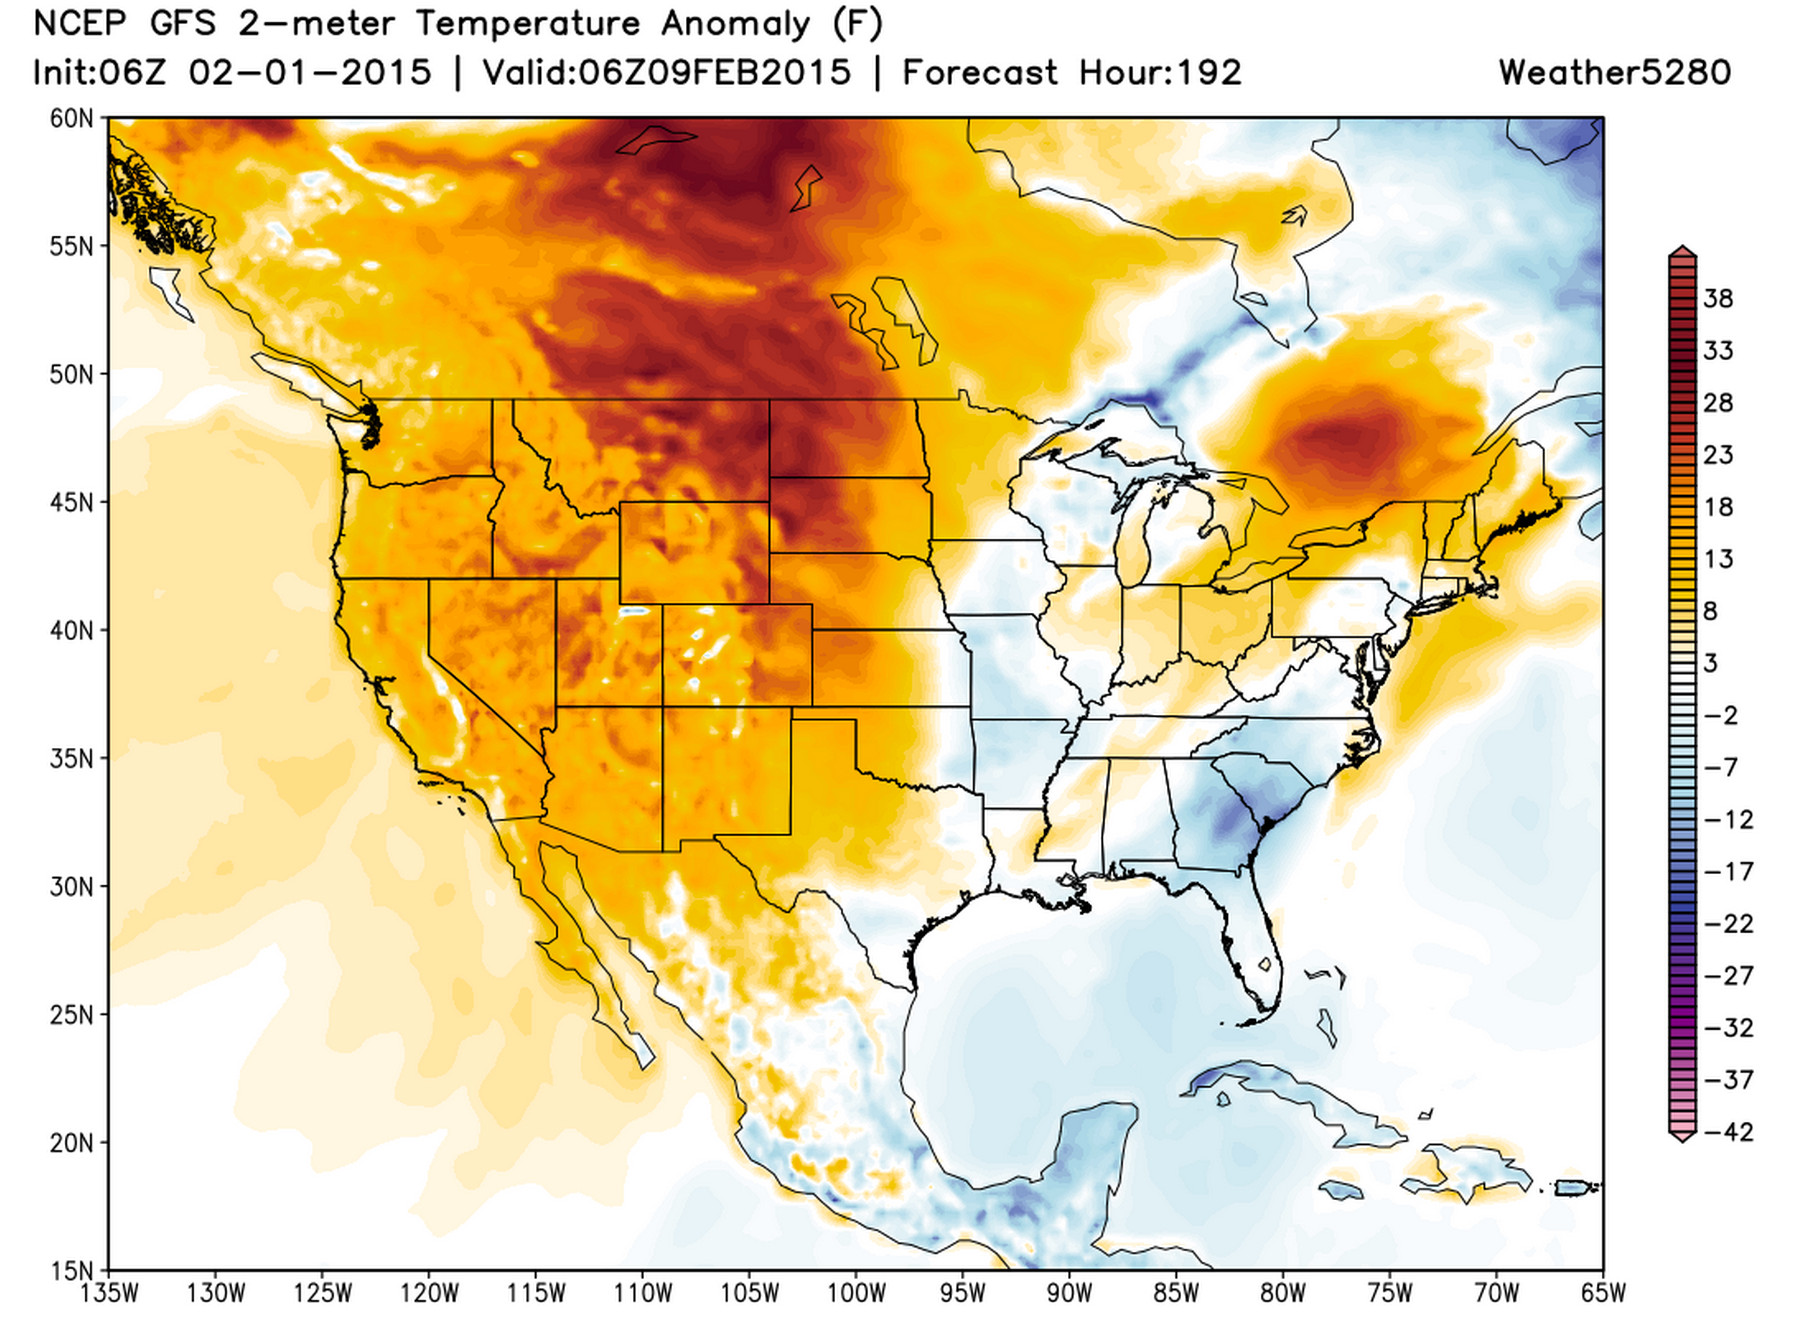 GFS 2-meter temperature anomaly forecast | Weather5280 Models